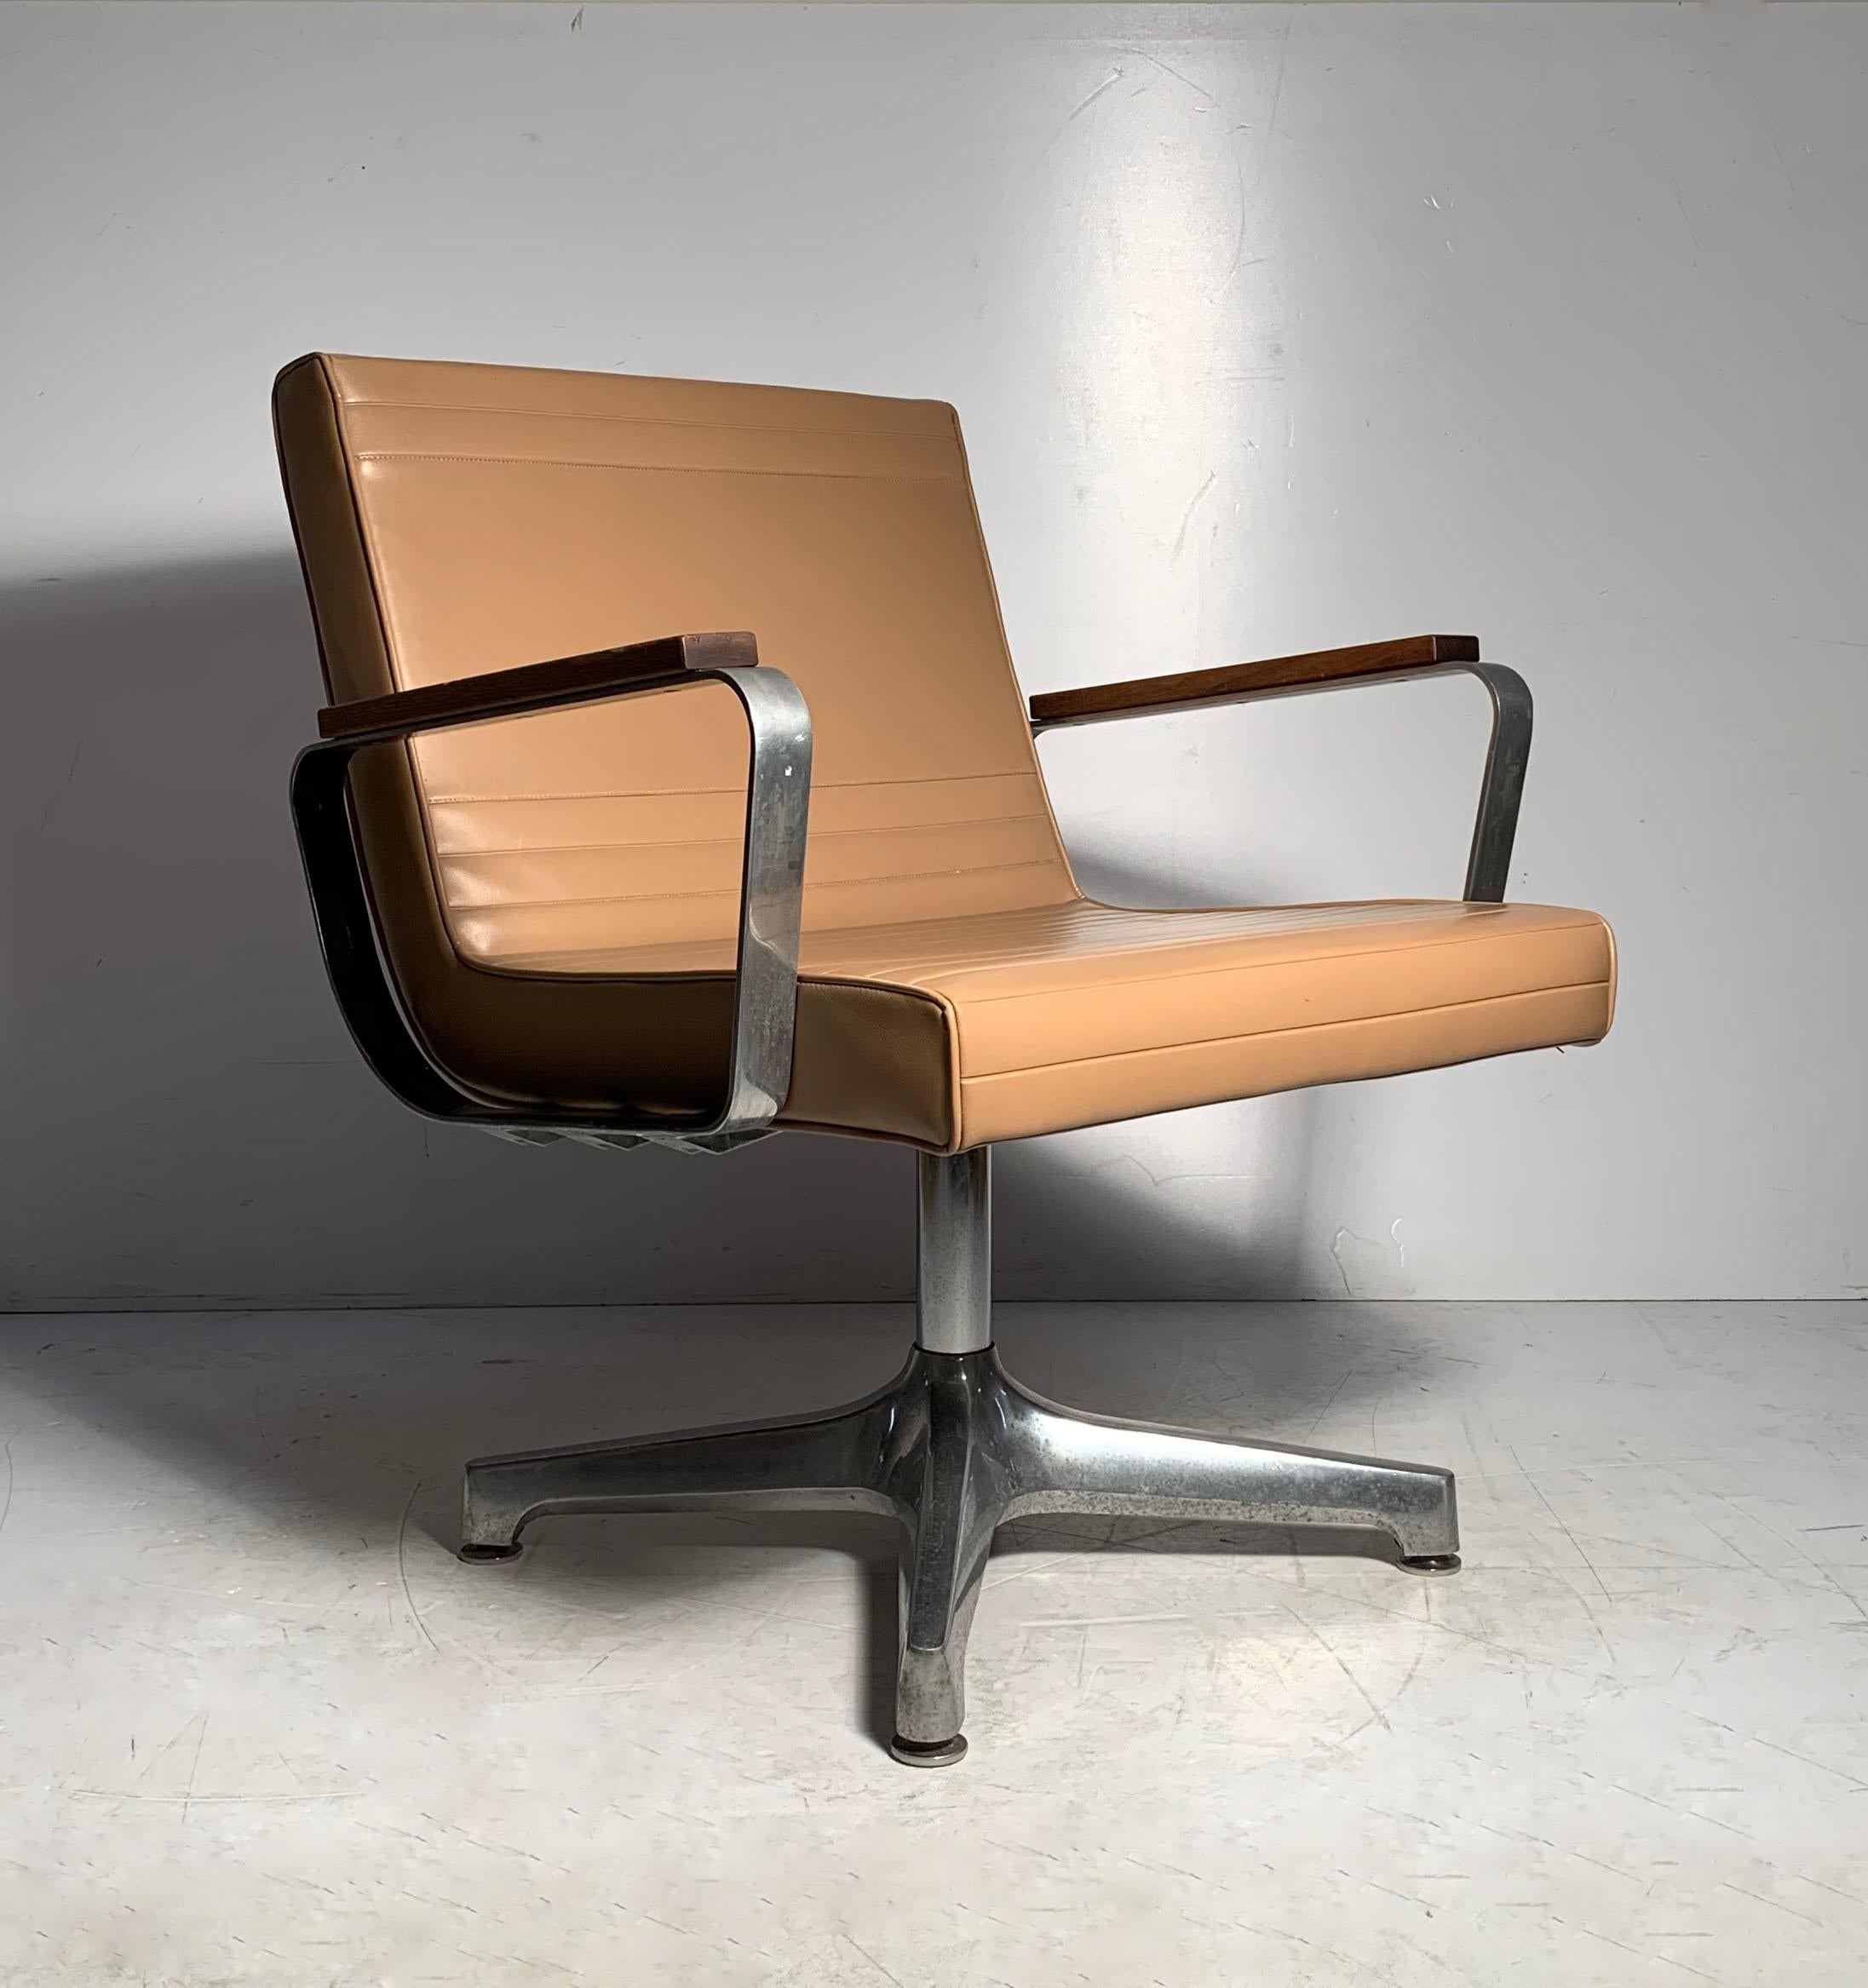 Vintage Techfab chromcraft lounge chairs. Original Vinyl Upholstery in very nice condition. Arms are optional. Easily removable as shown in last photos. In the manner of Herman Miller Alexander Girard, Charles Eames, Milo Baughman

Price is for the